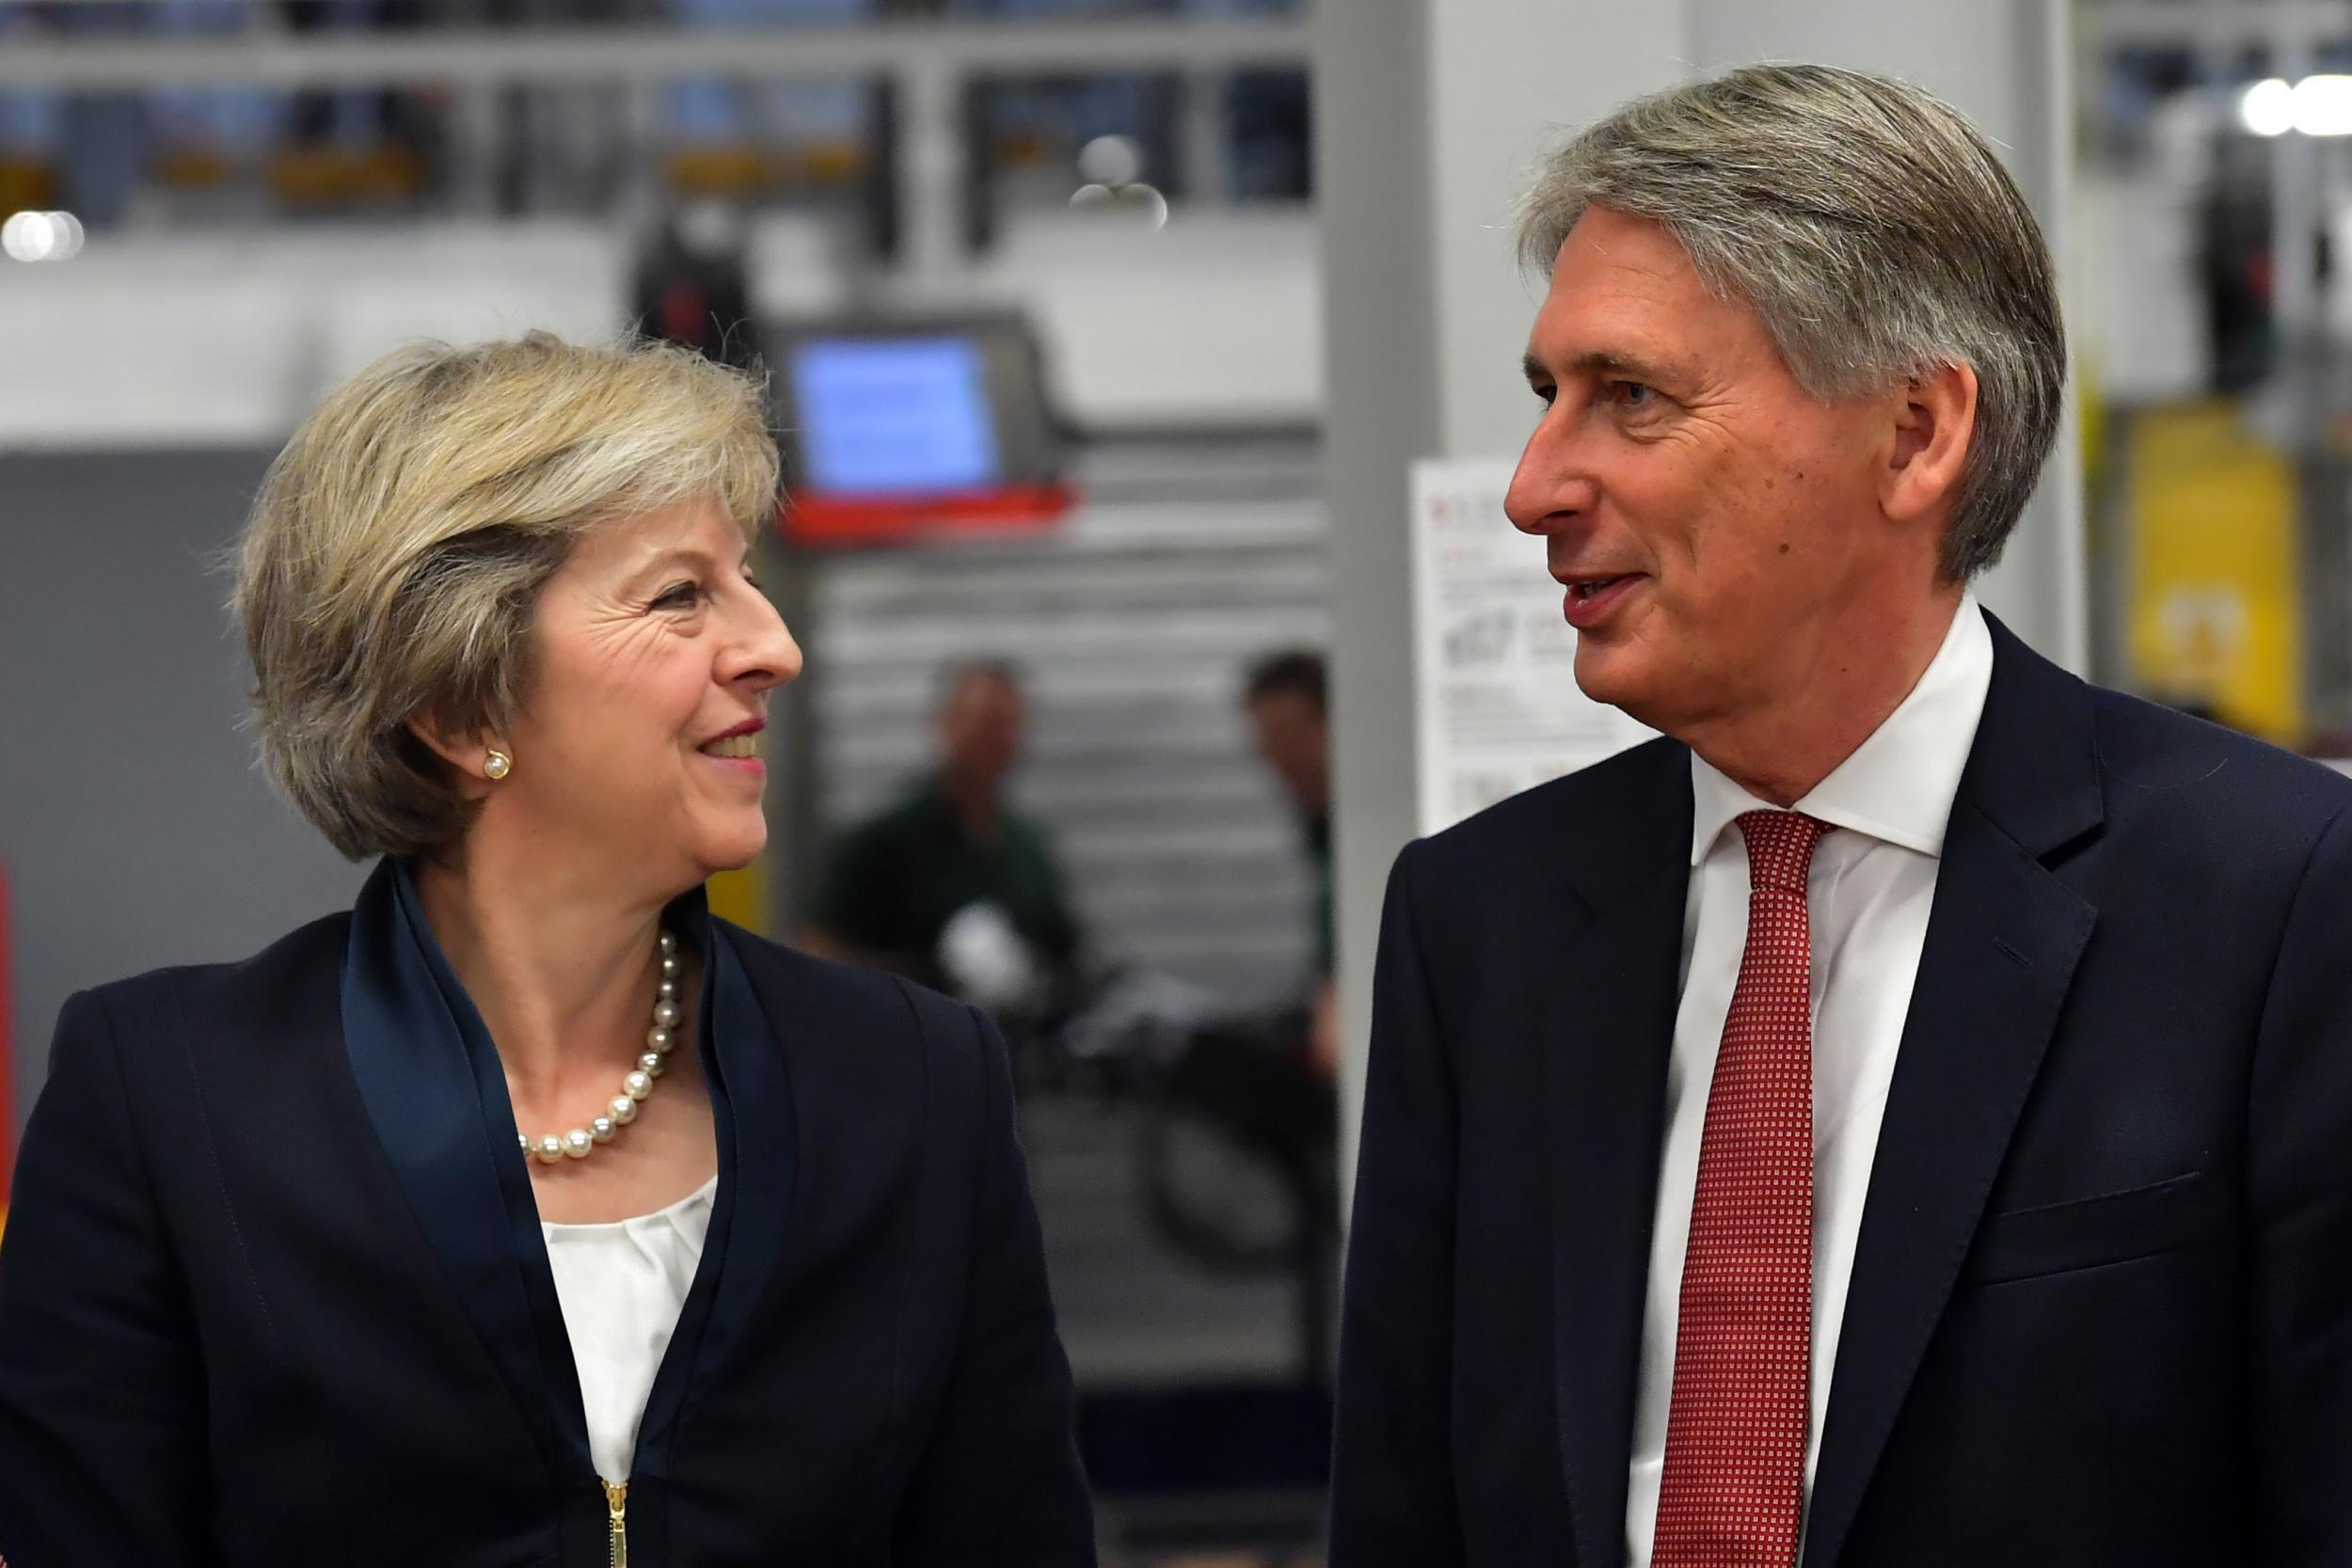 Theresa May and Philip Hammond are trusted more on the economy than Jeremy Corbyn and John McDonnell